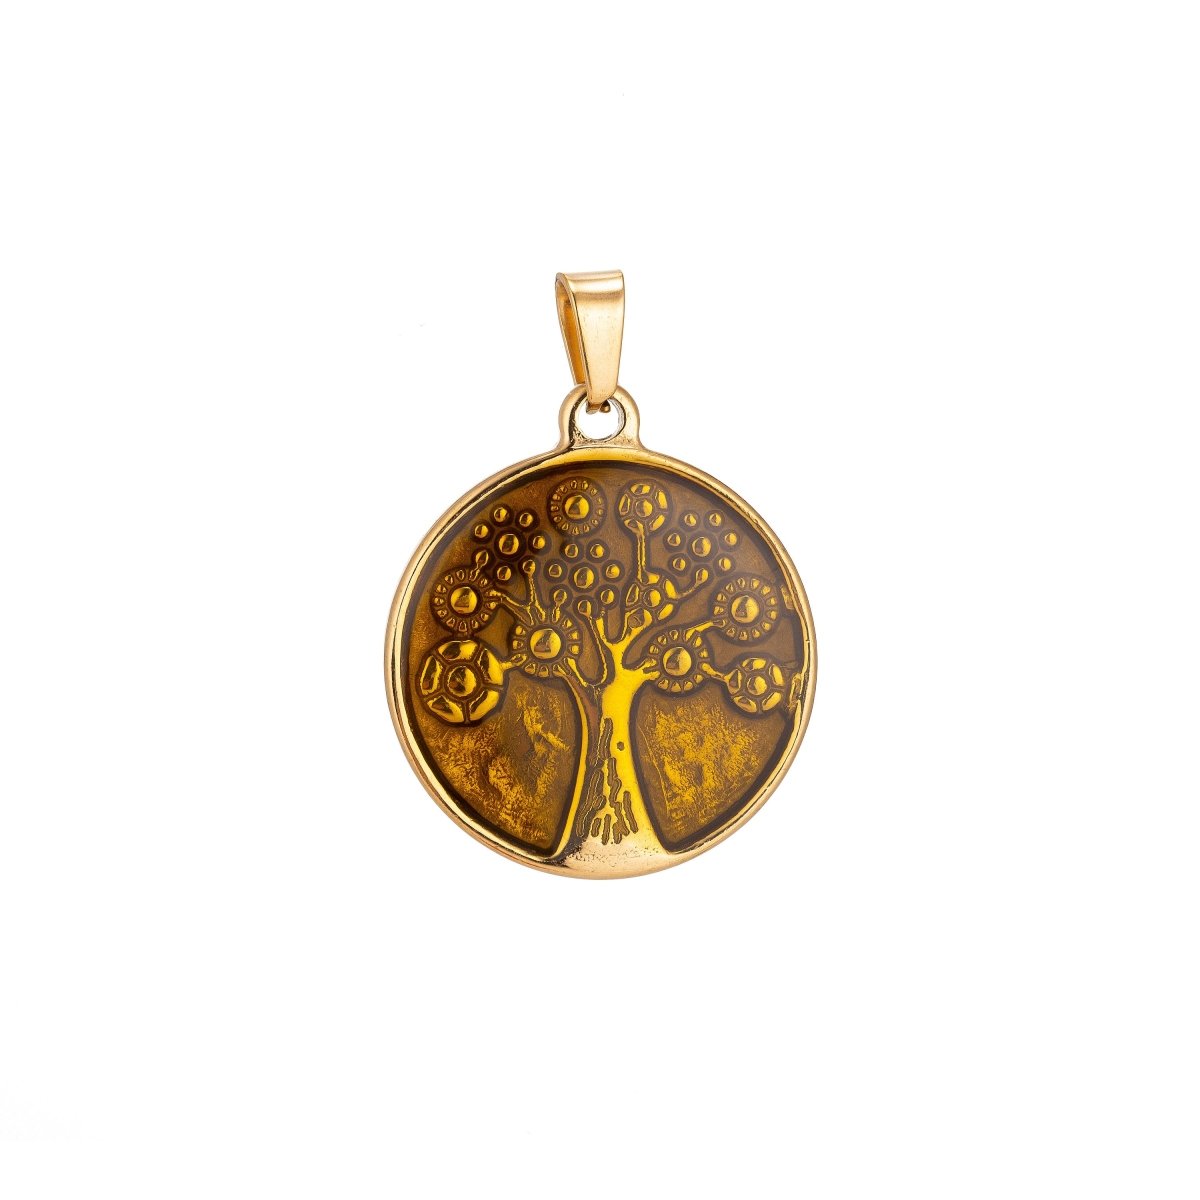 Gold filled Rustic symbolic Yellow Tree of Life Pendant Coin Medallion Charm 35mmx25mm w/ Bails for Layer necklace jewelry making J-417 - DLUXCA